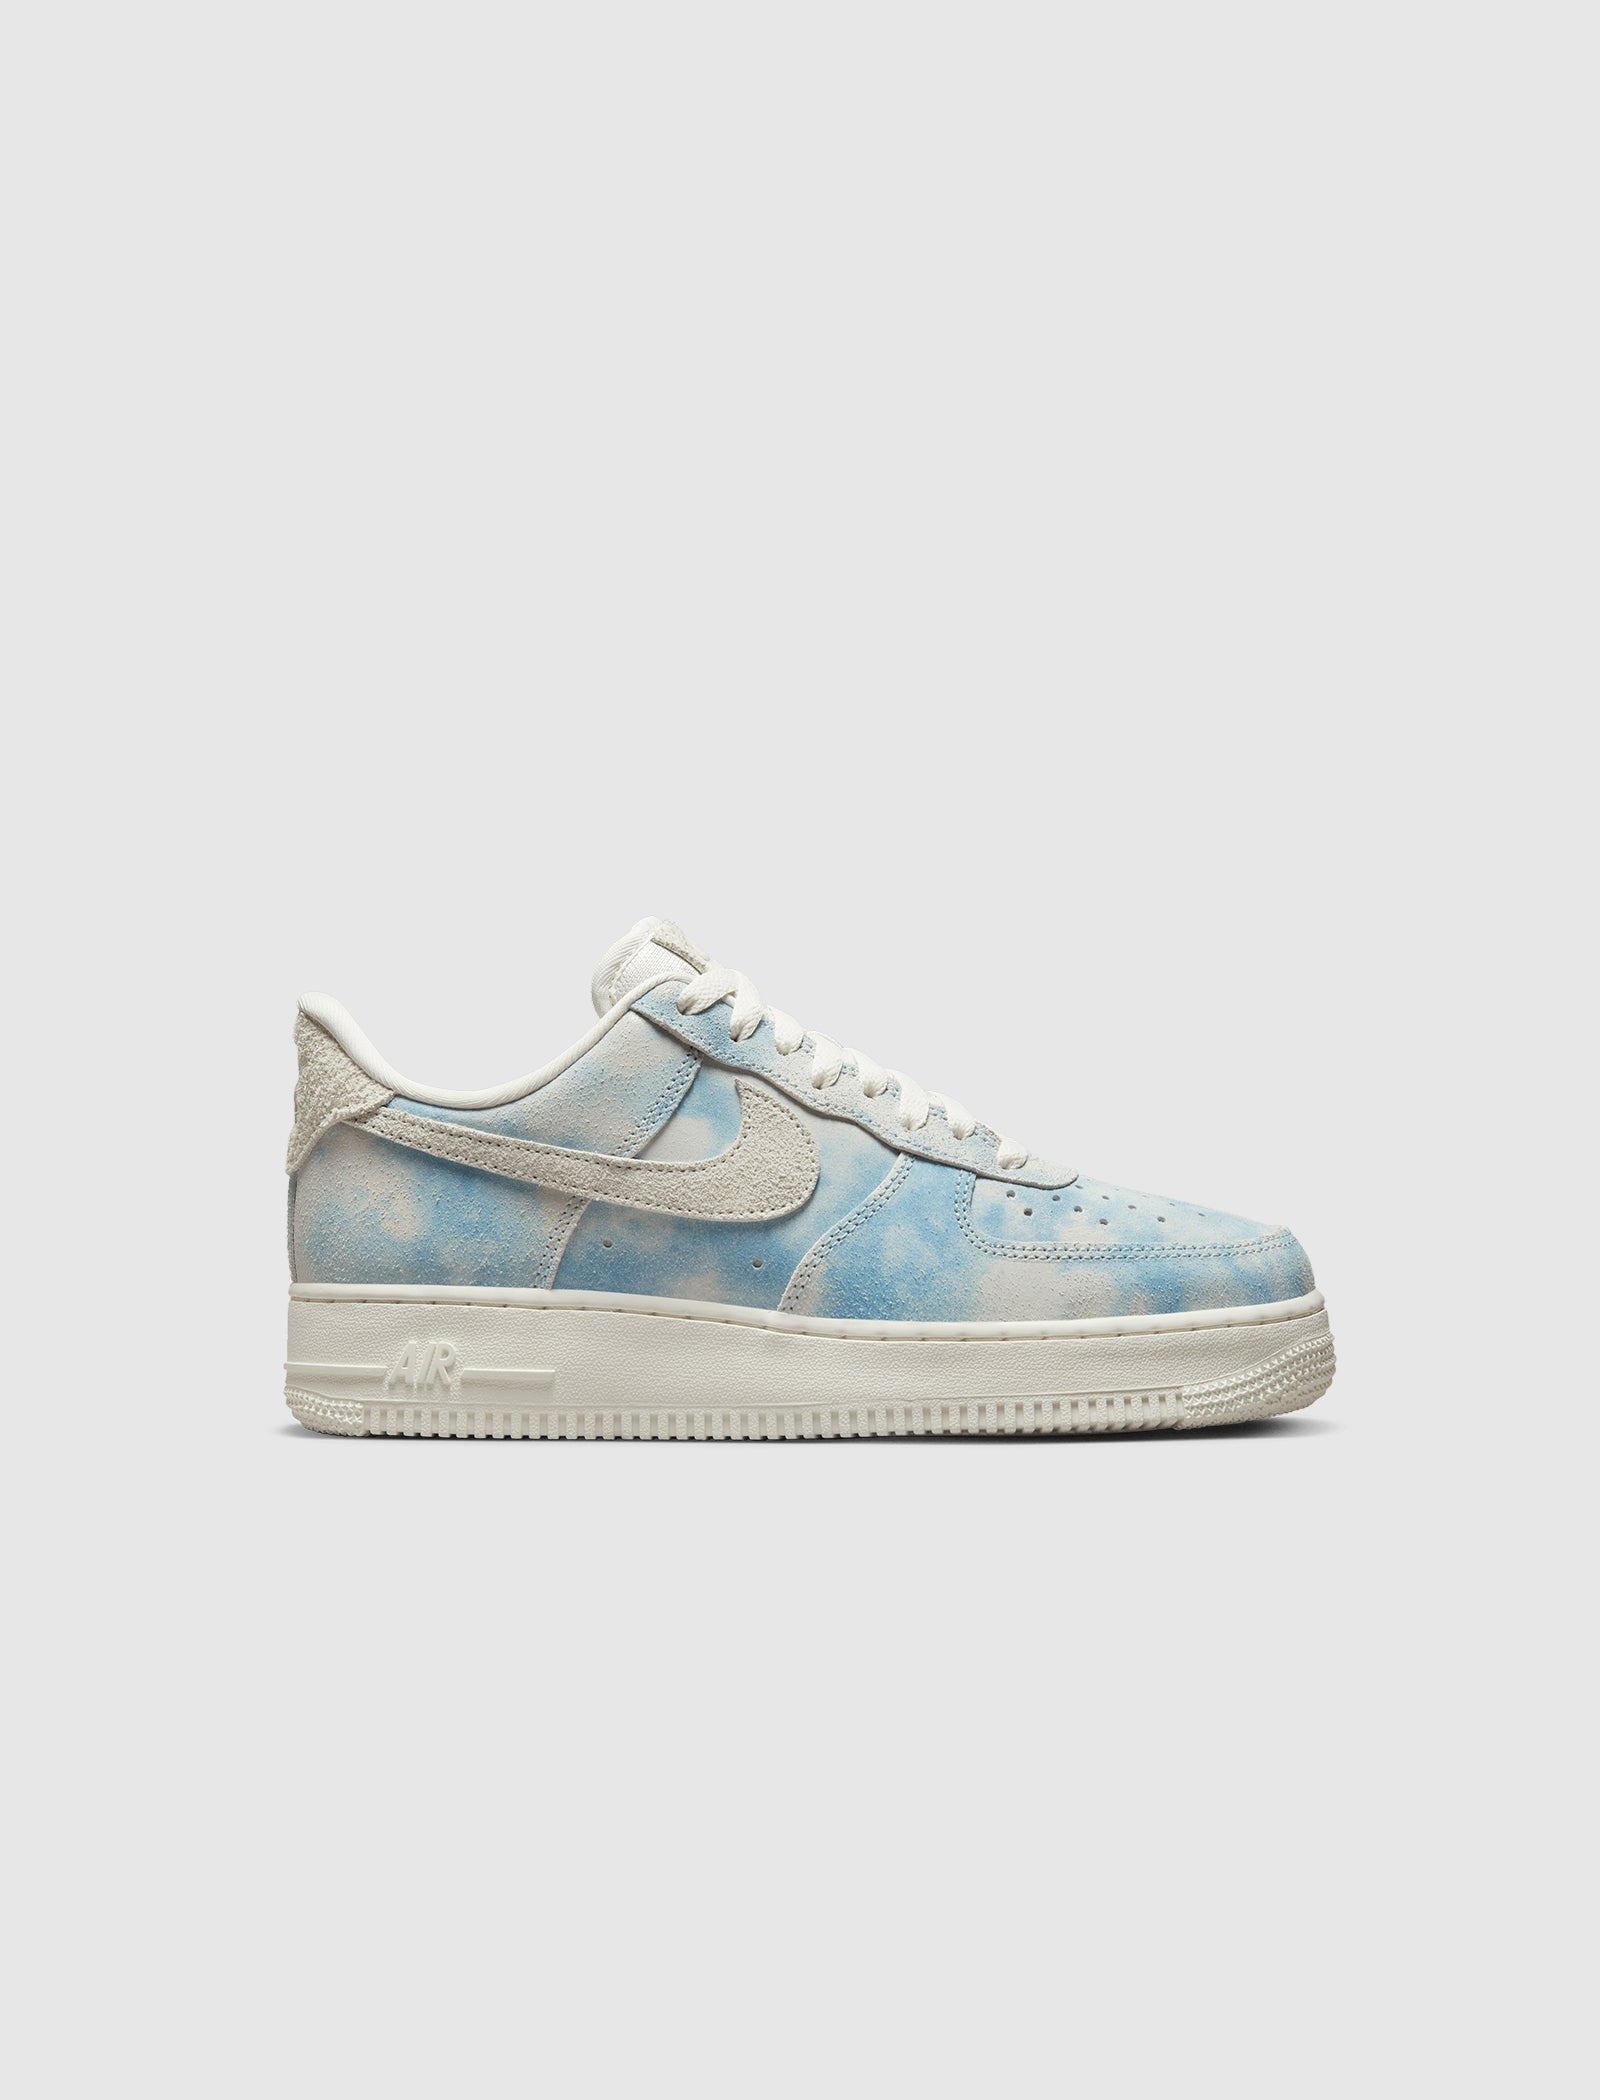 WOMEN'S AIR FORCE 1 '07 SE "CLOUDS"